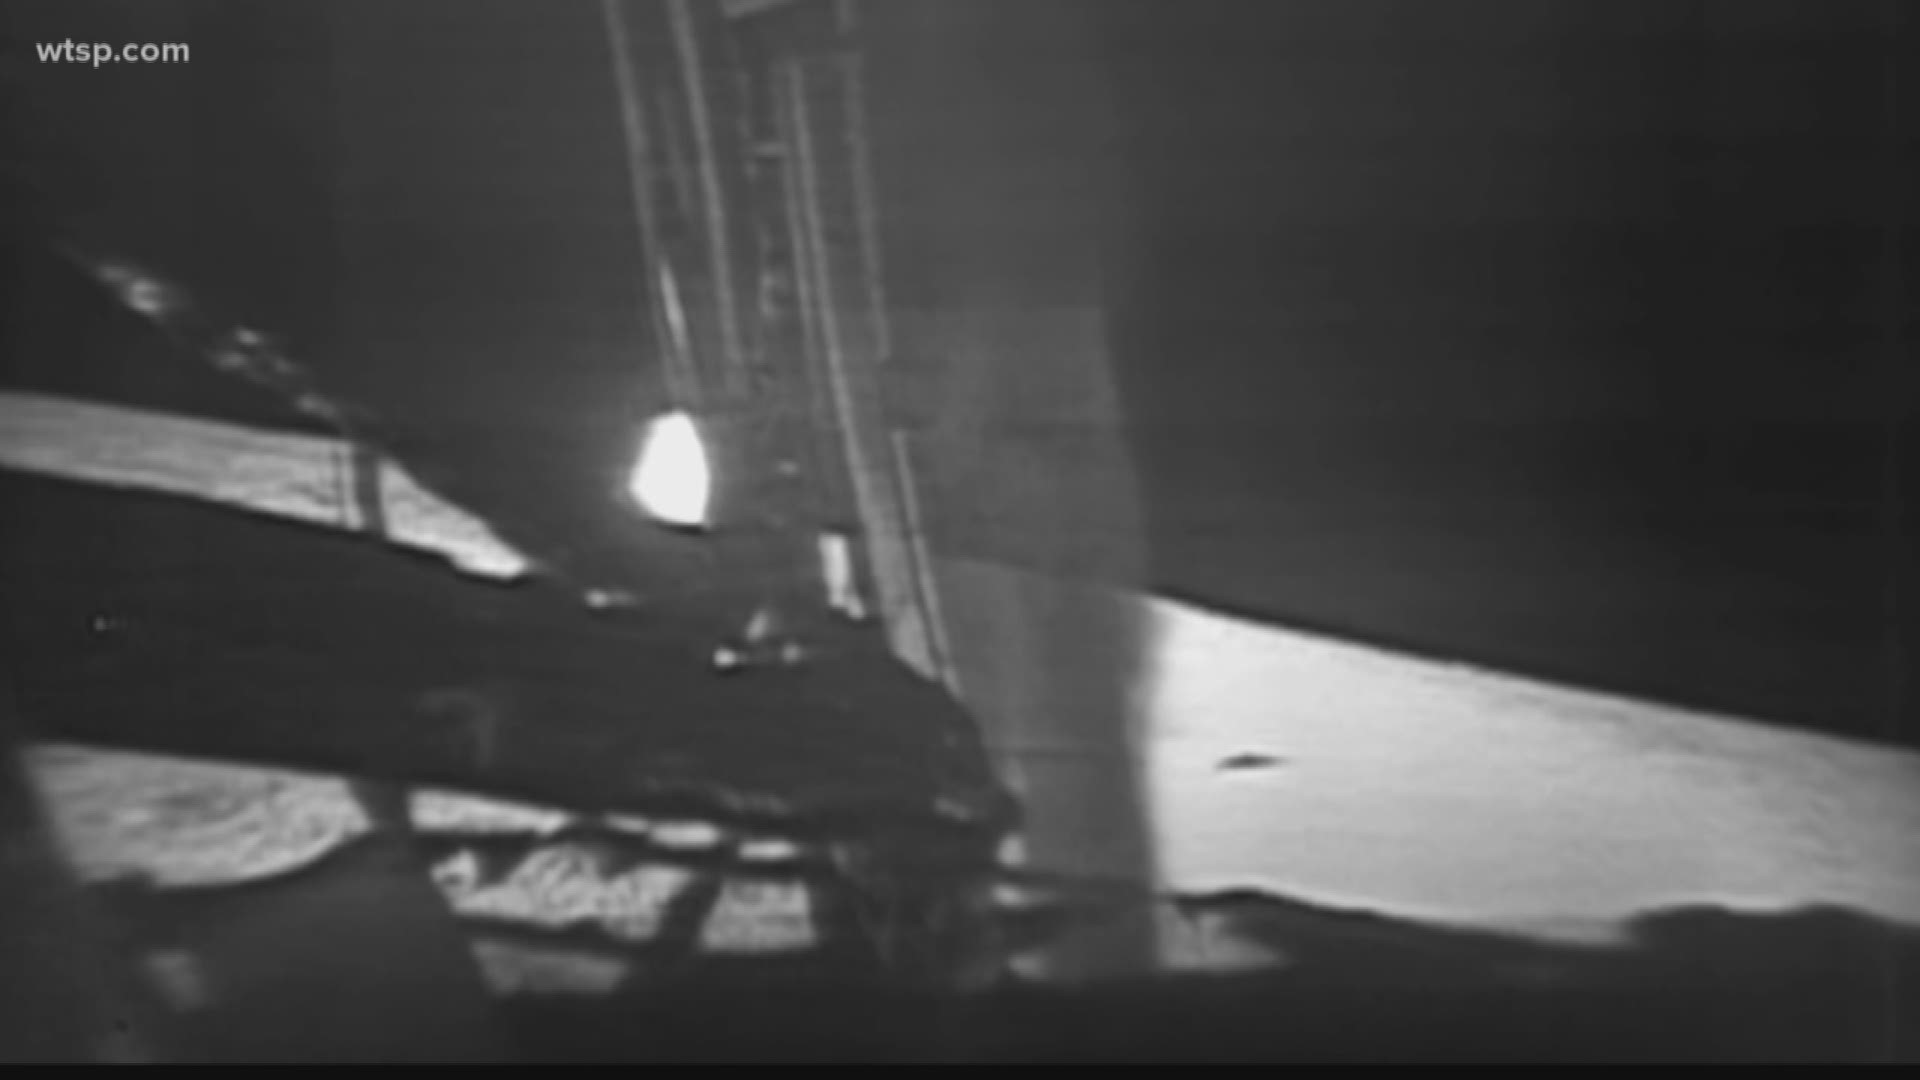 On Sept. 12, 1959, the Luna 2 became the first human-made spacecraft to reach another celestial body. The Soviet-made spacecraft reached the moon on that day.